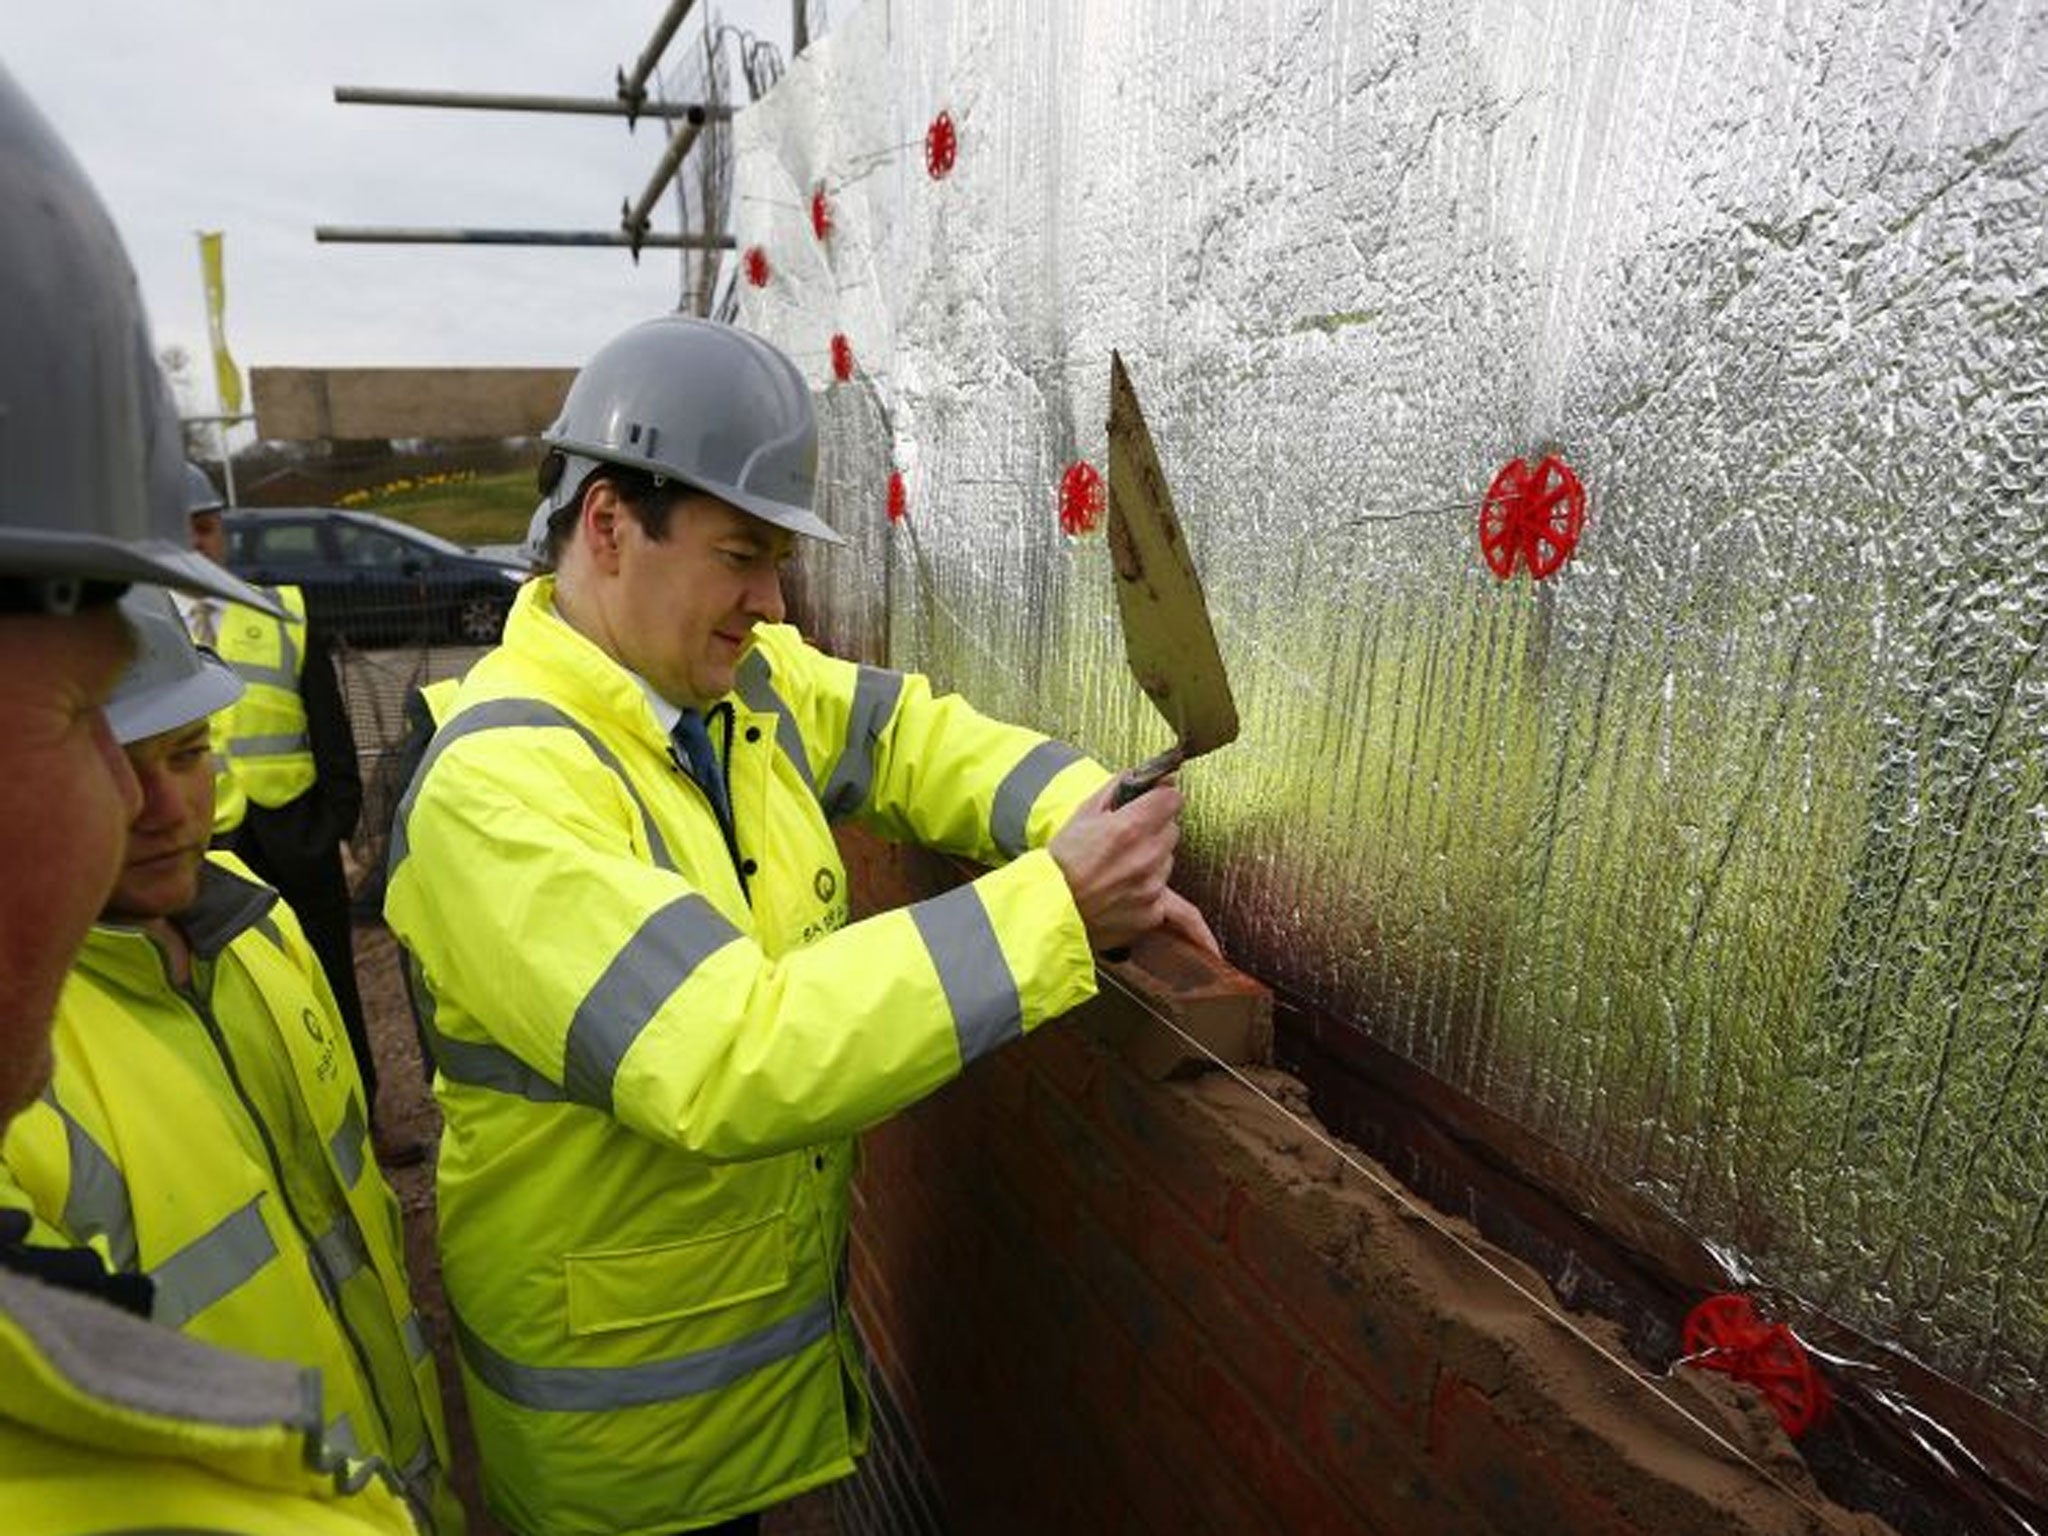 Chancellor of the Exchequer George Osborne lays a brick during a visit to a Barratt Homes building site in Nuneaton, the day after he said in his annual budget that the government would extend the equity loan portion of the Help to Buy scheme for four yea